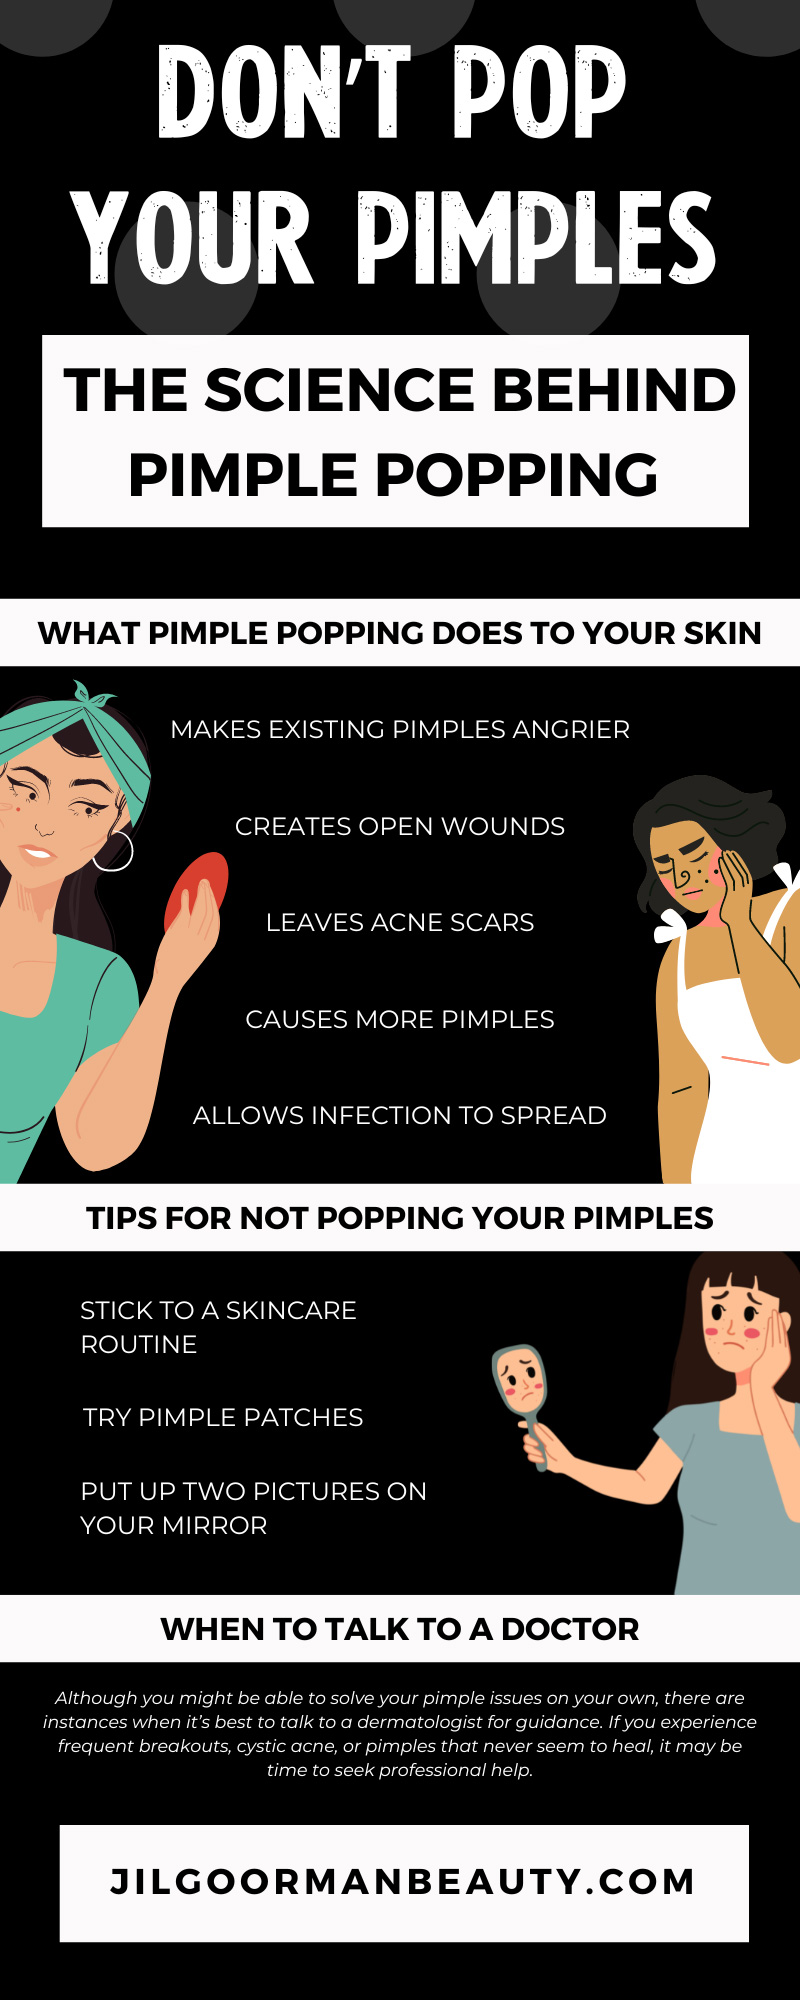 Don’t Pop Your Pimples: The Science Behind Pimple Popping